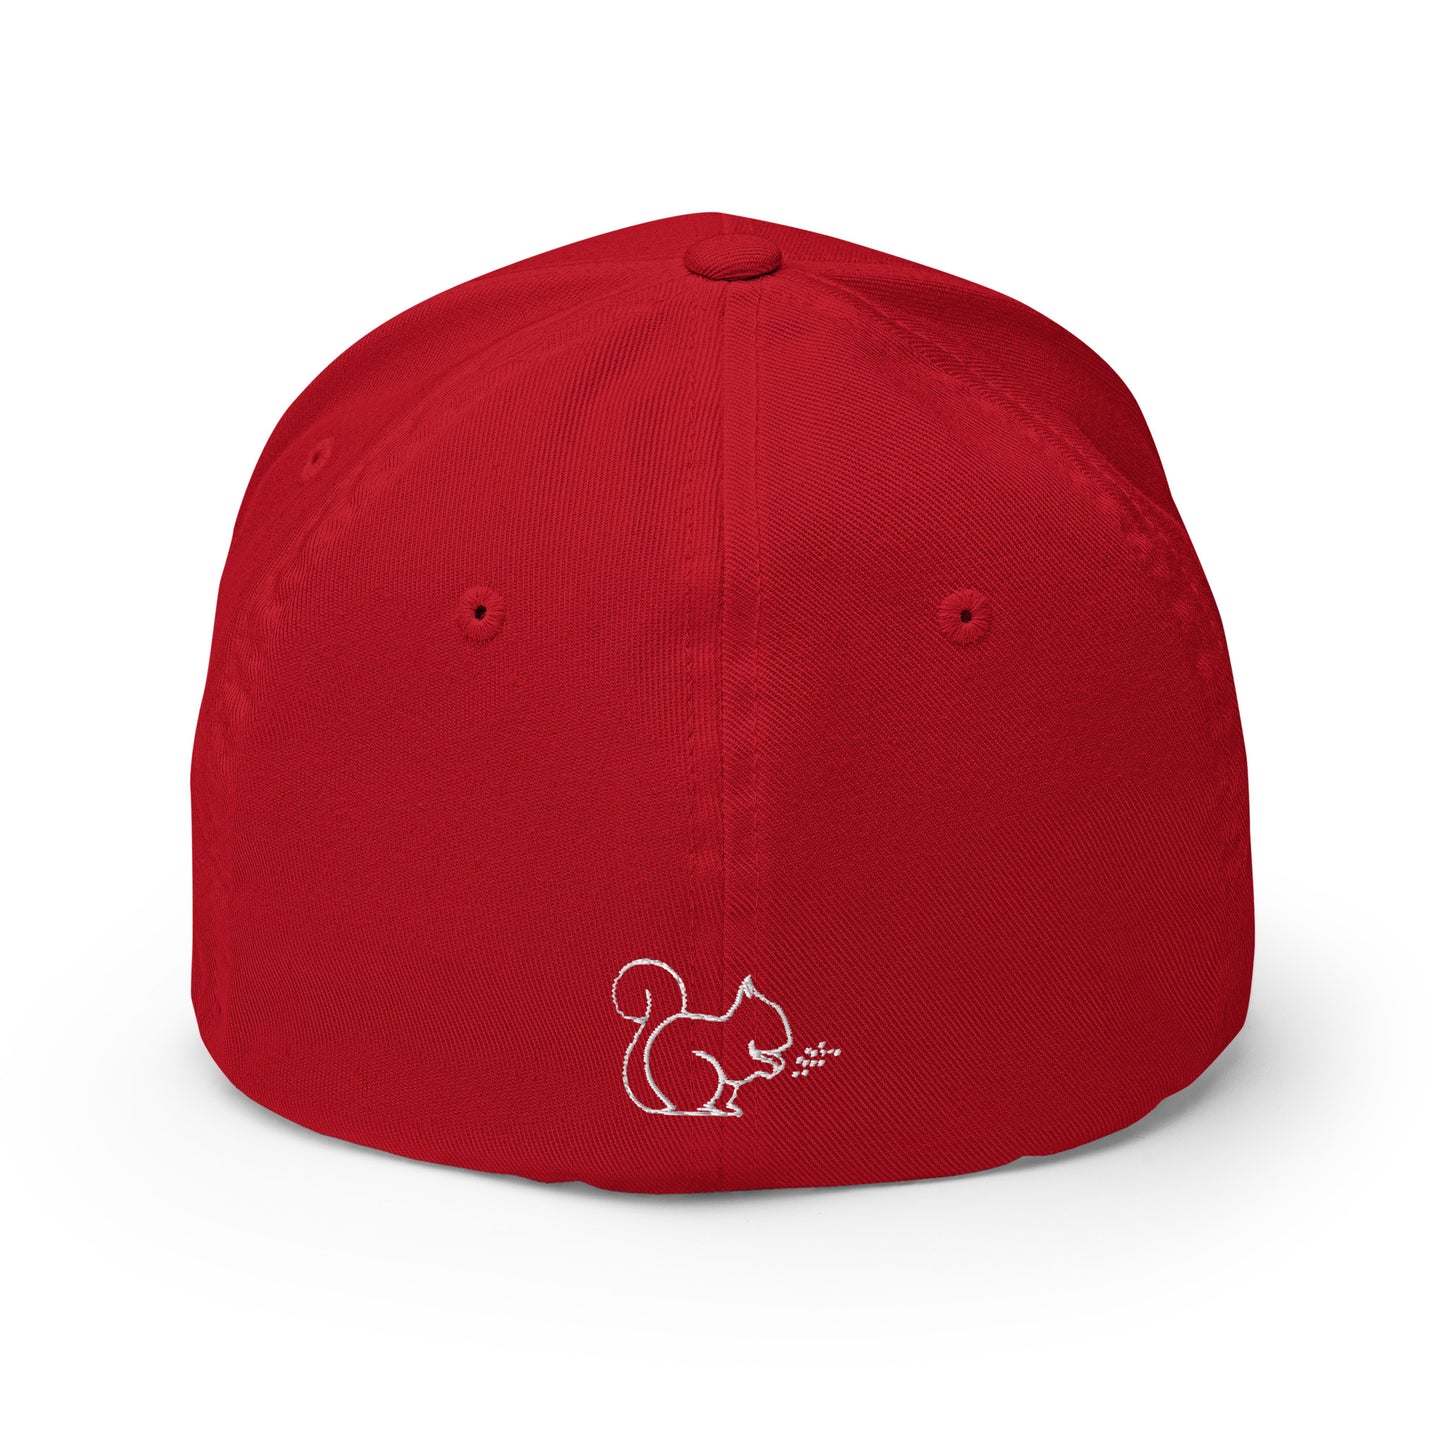 Caddy Couture Structured Twill Cap - Red